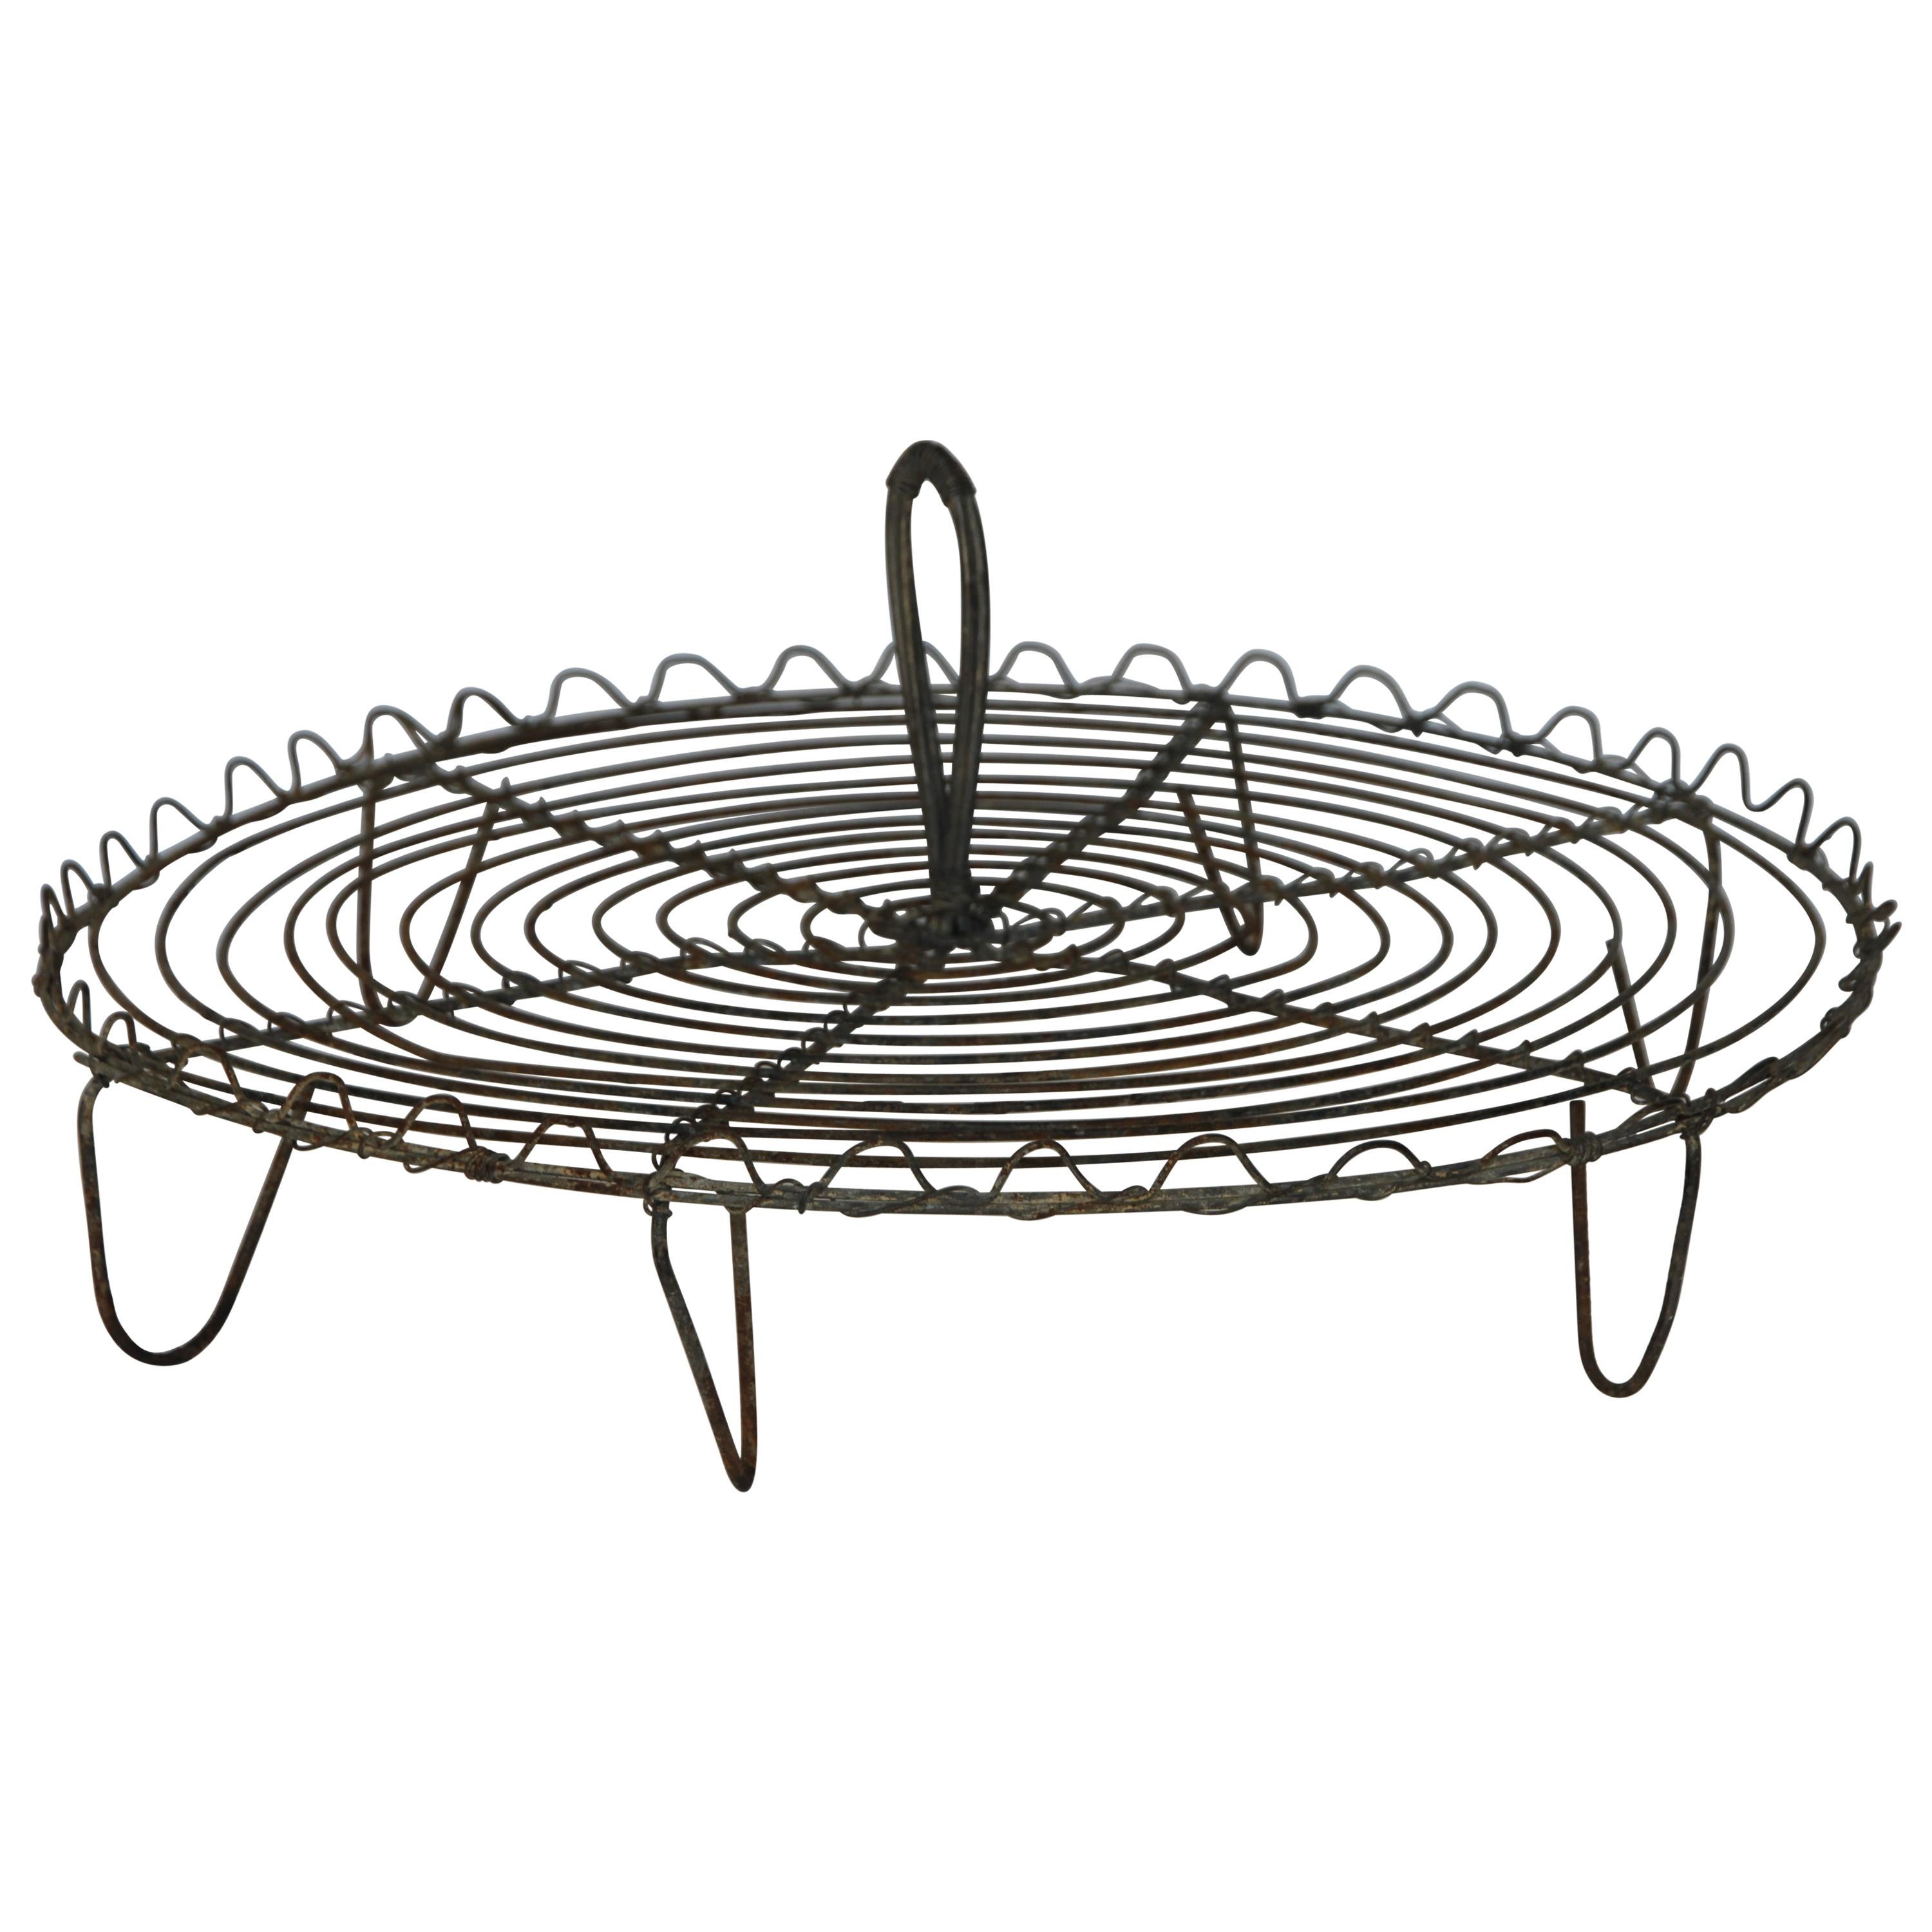 Antique French Wire Patisserie Cooling Rack